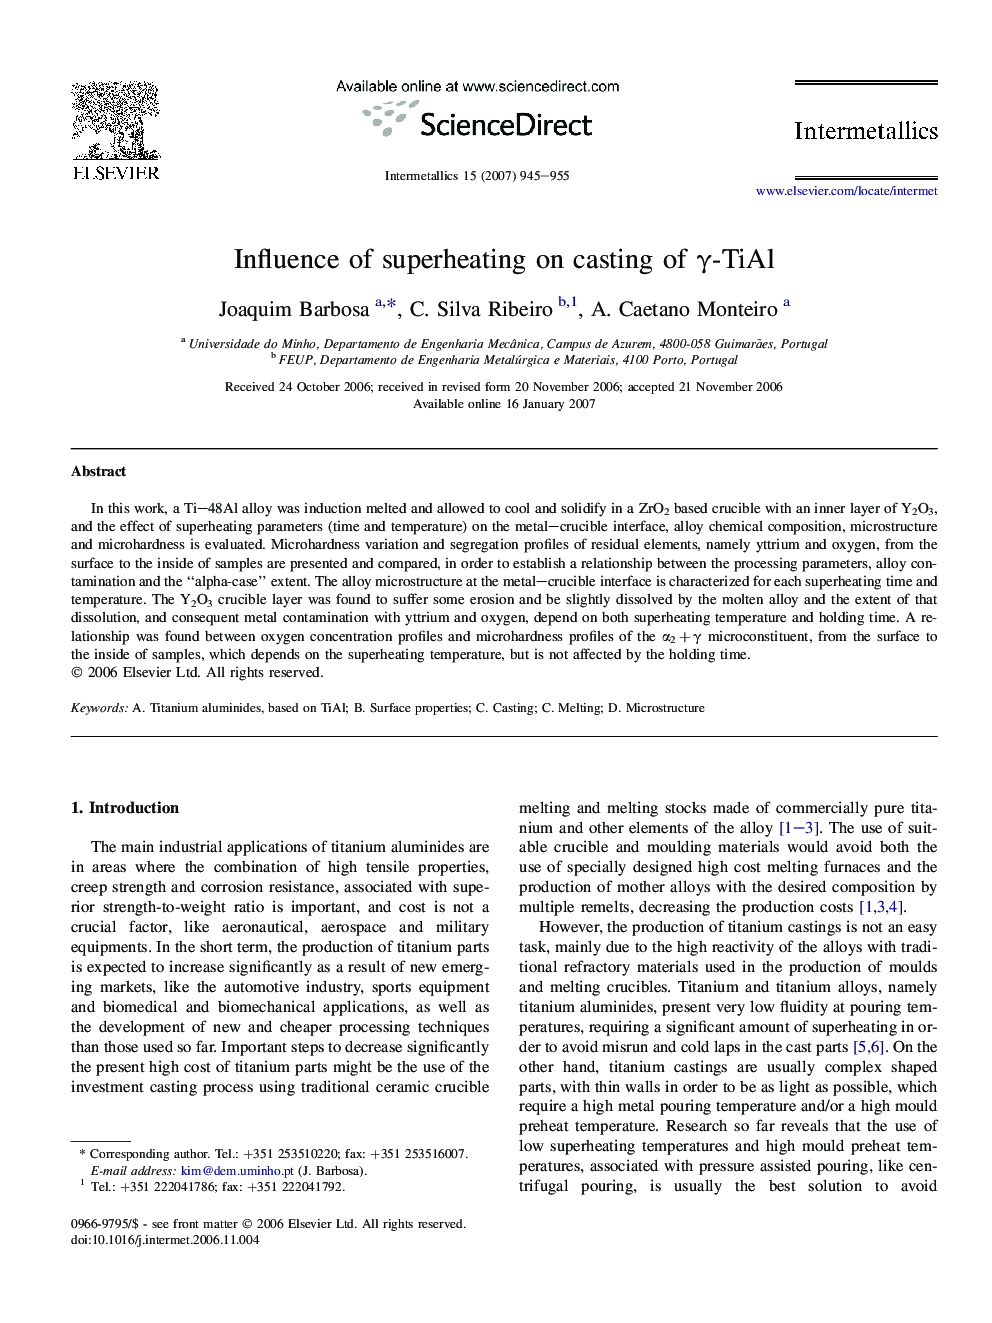 Influence of superheating on casting of γ-TiAl